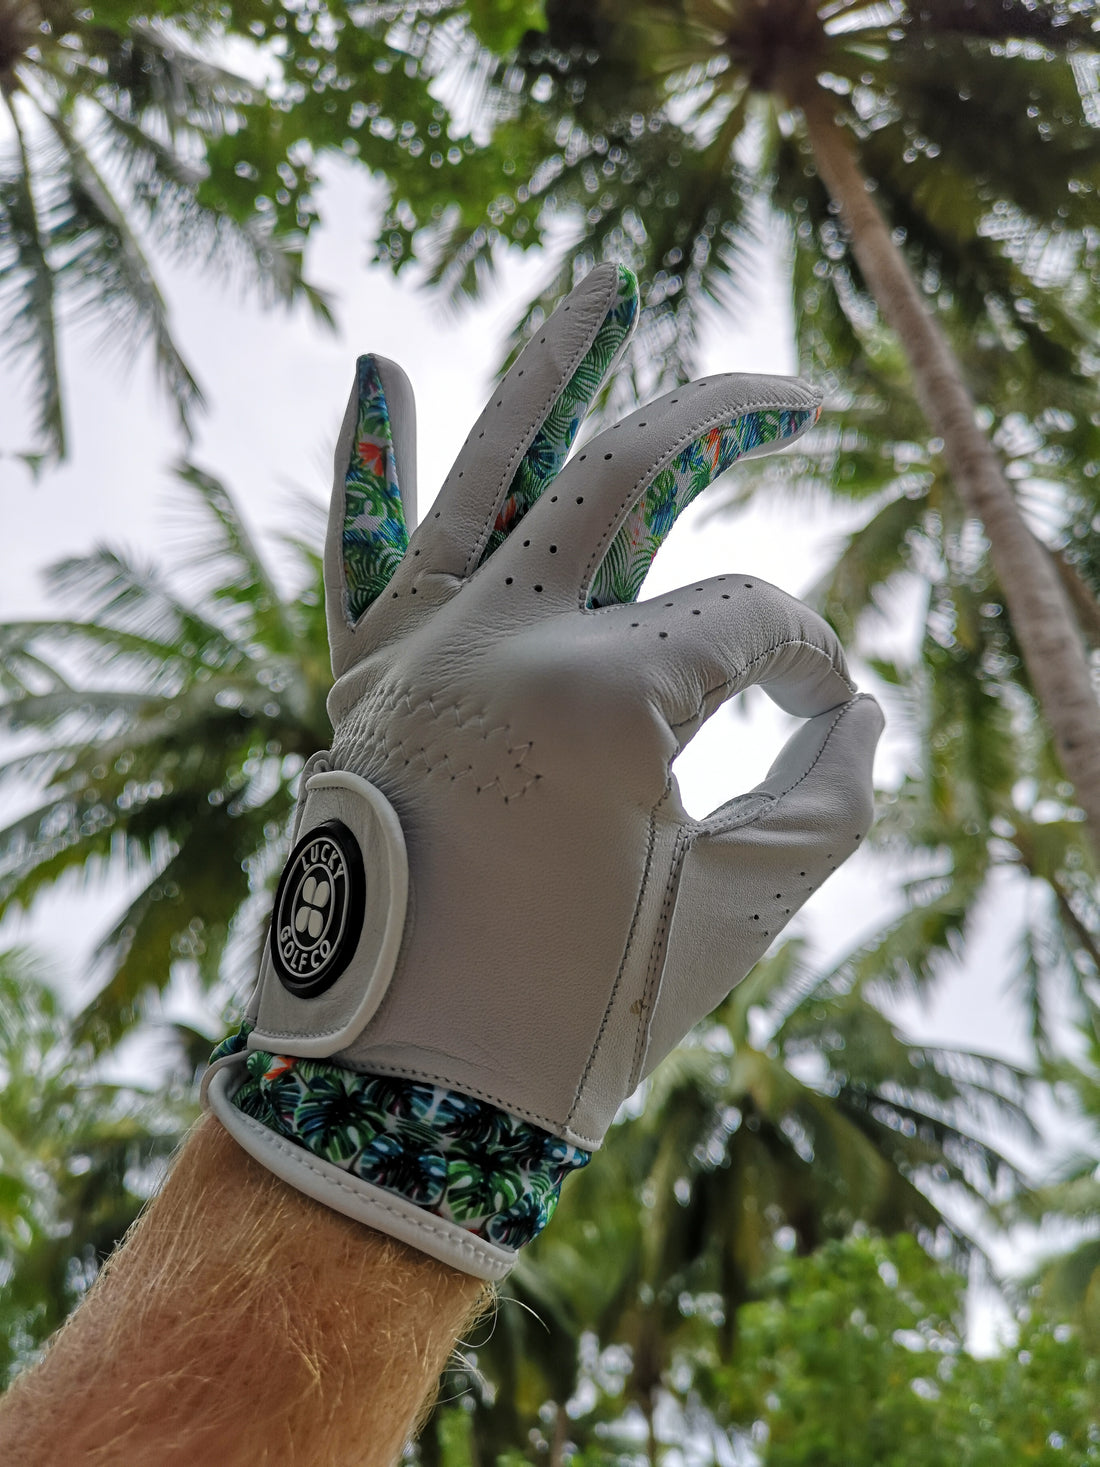 Our new golf glove design has LAUNCHED!